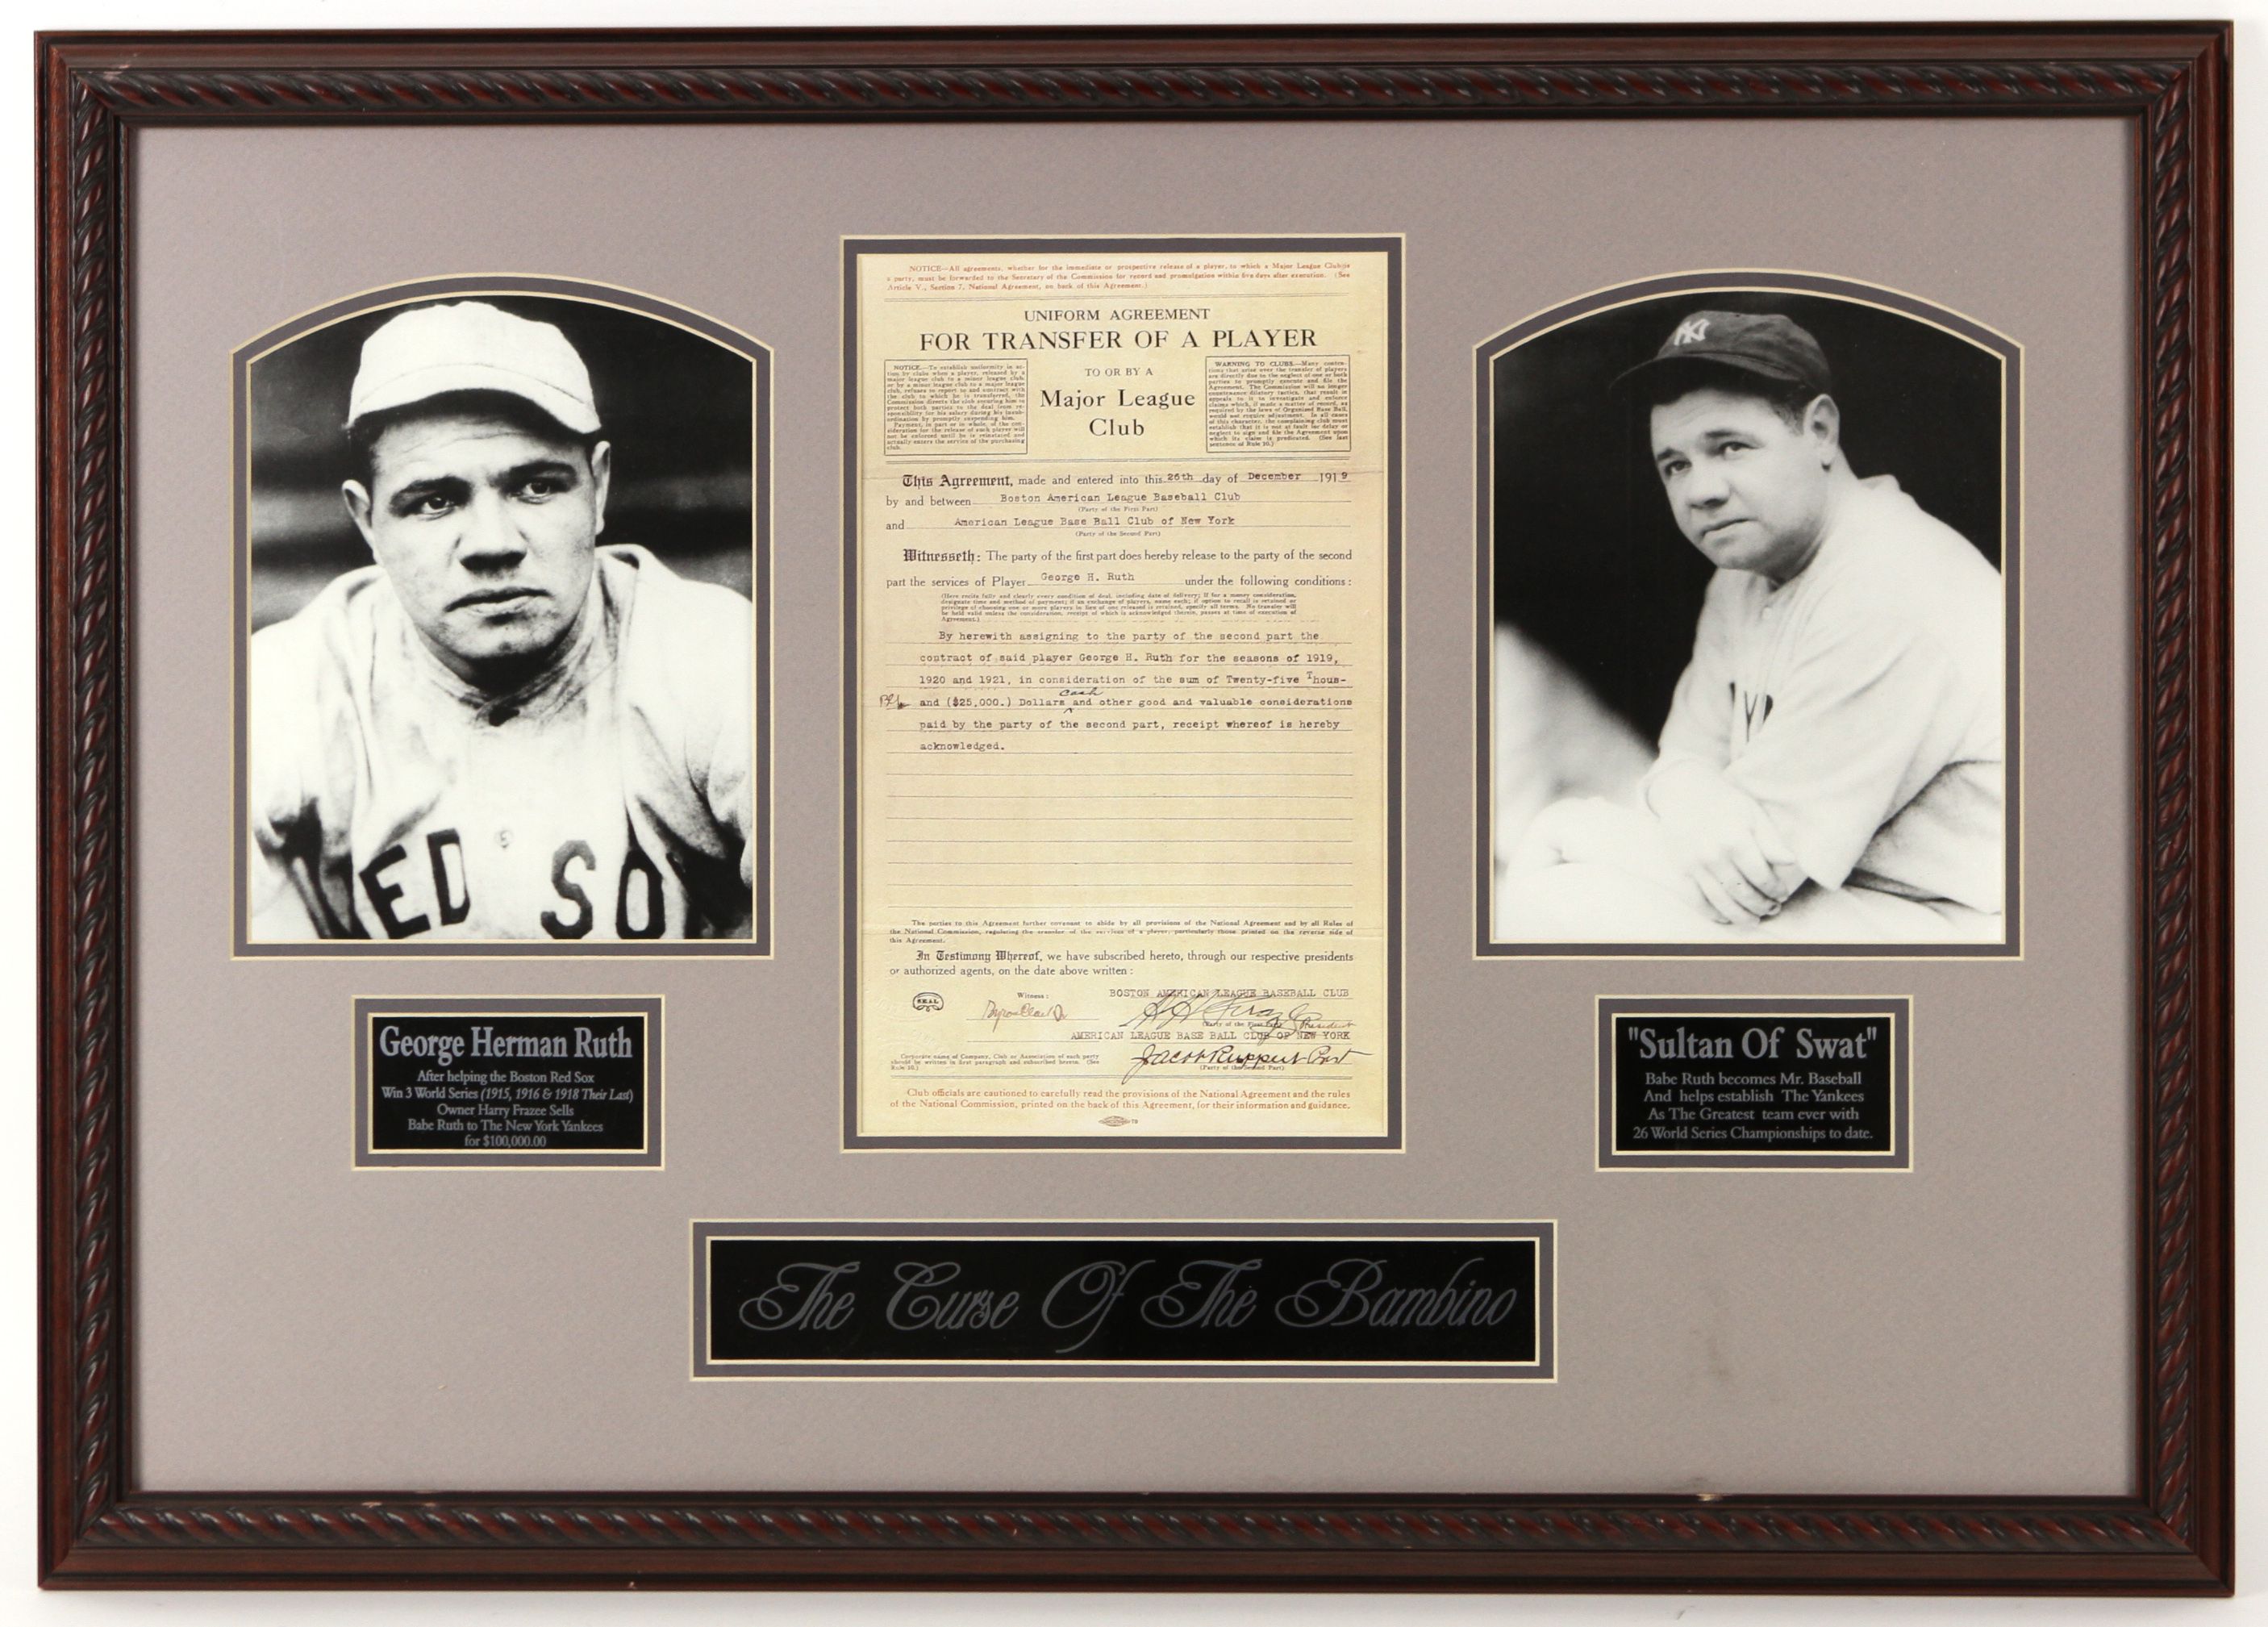 Lot Detail - 2003 Babe Ruth Curse of the Bambino 22 x 32 Framed Display  w/ Reproduction of Boston/New York Transfer Agreement